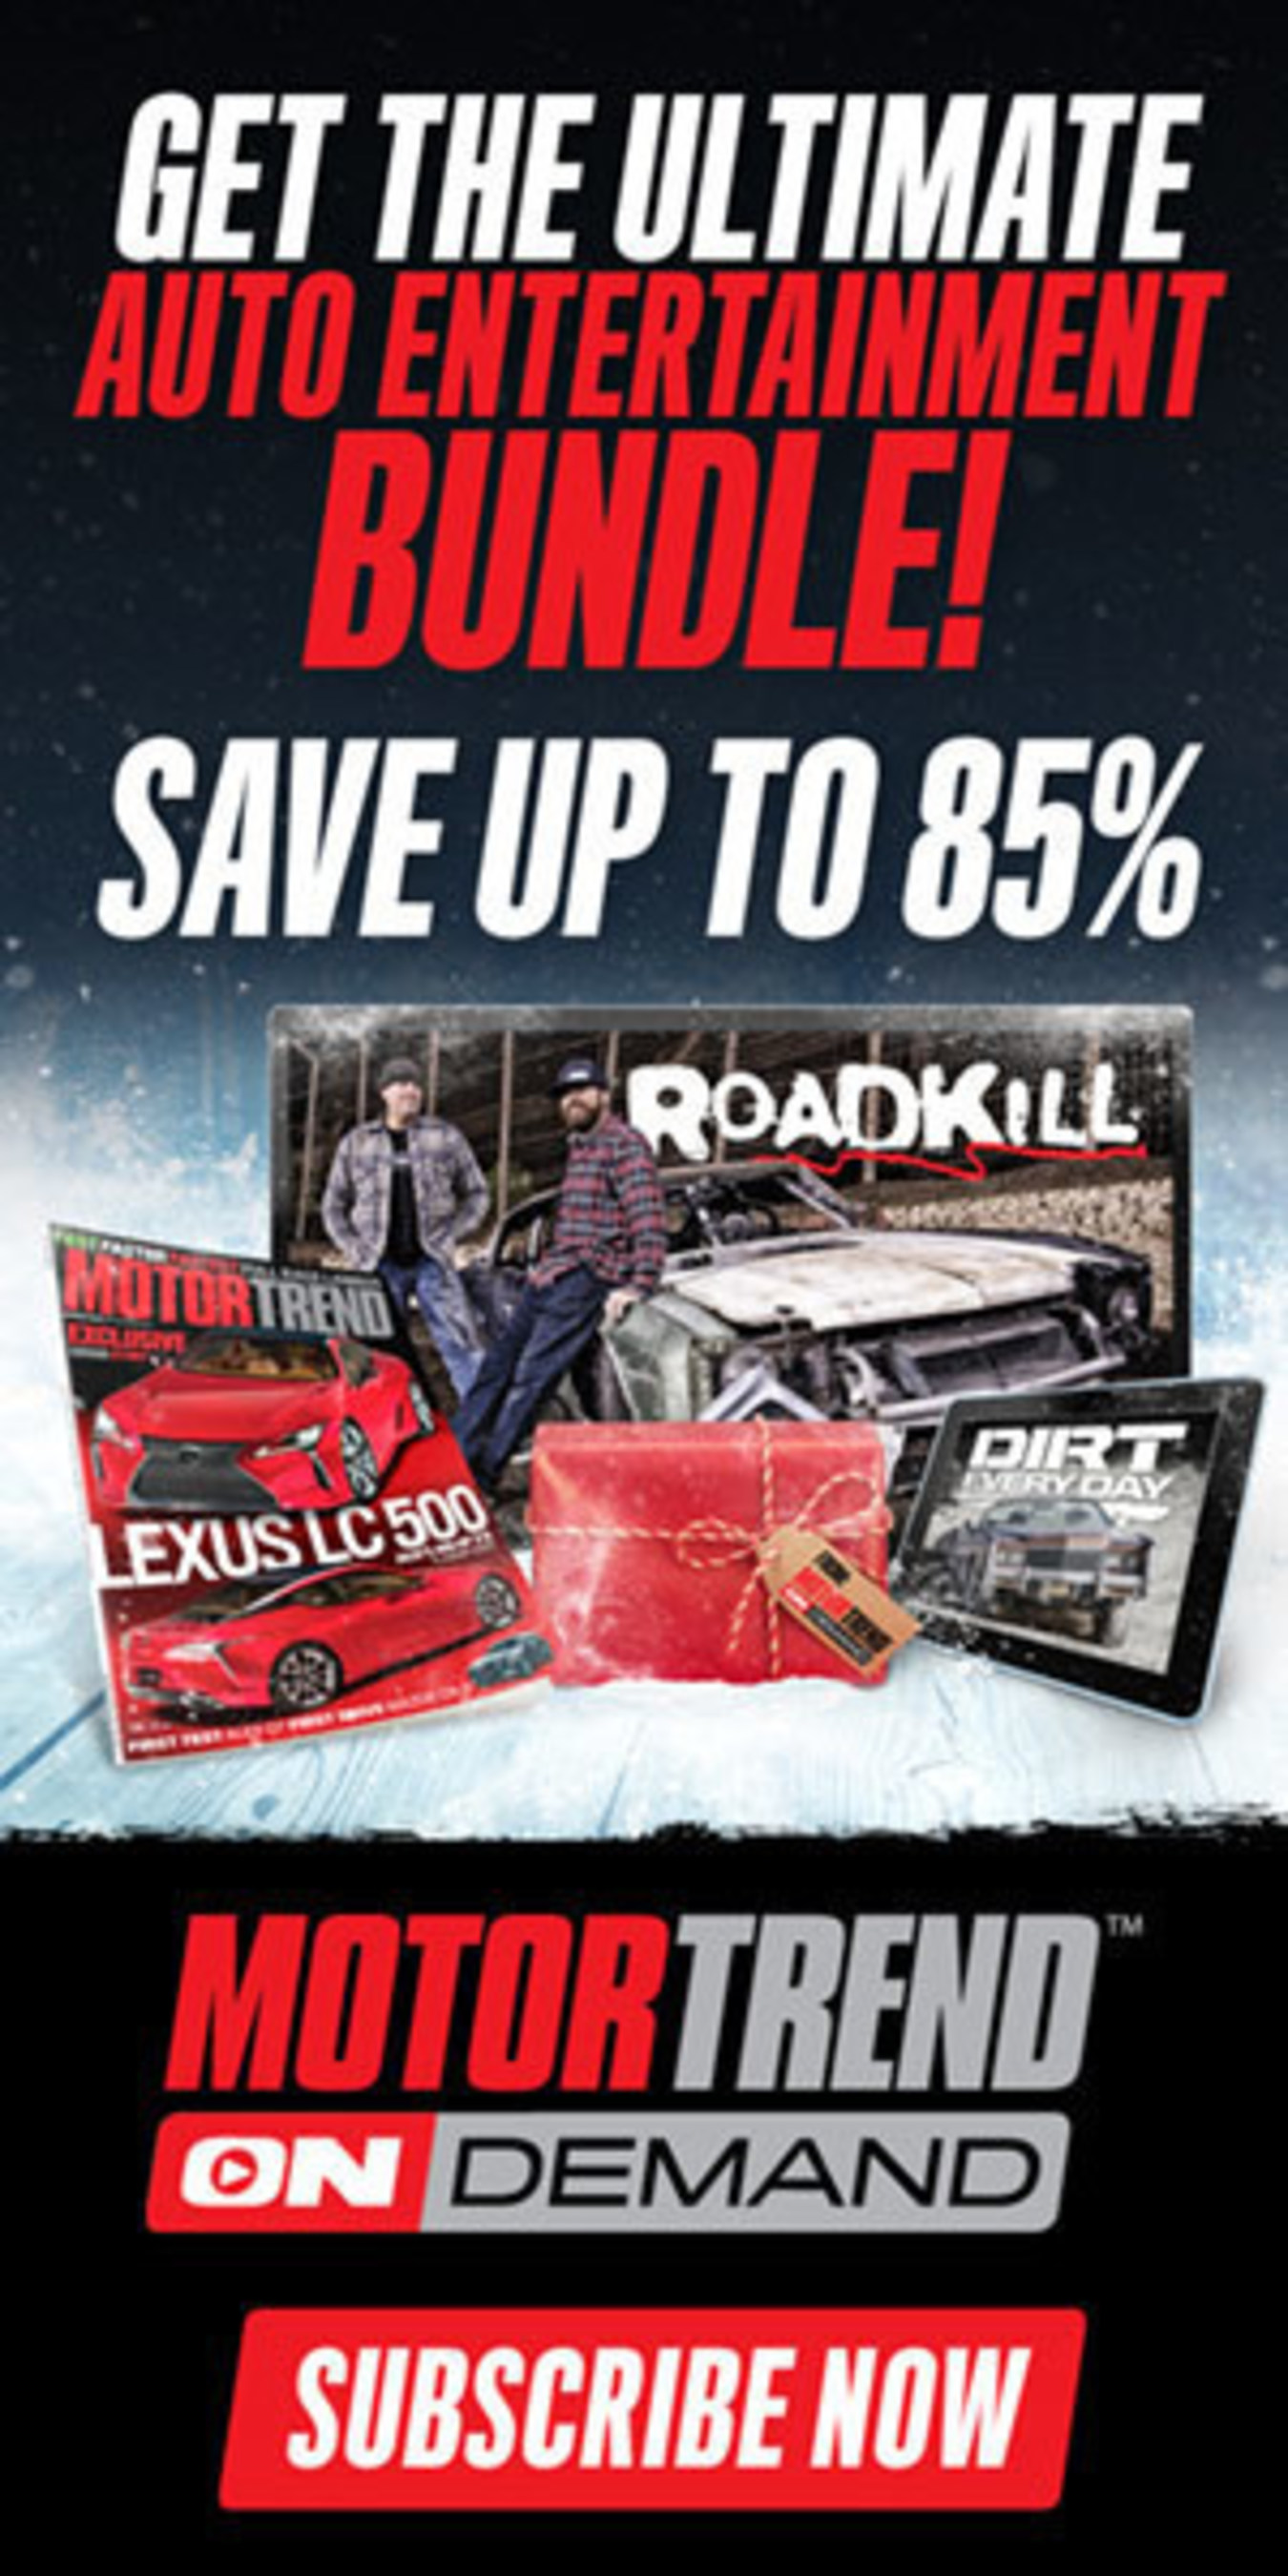 Save up to 85% with the ultimate Motor Trend OnDemand auto entertainment bundle